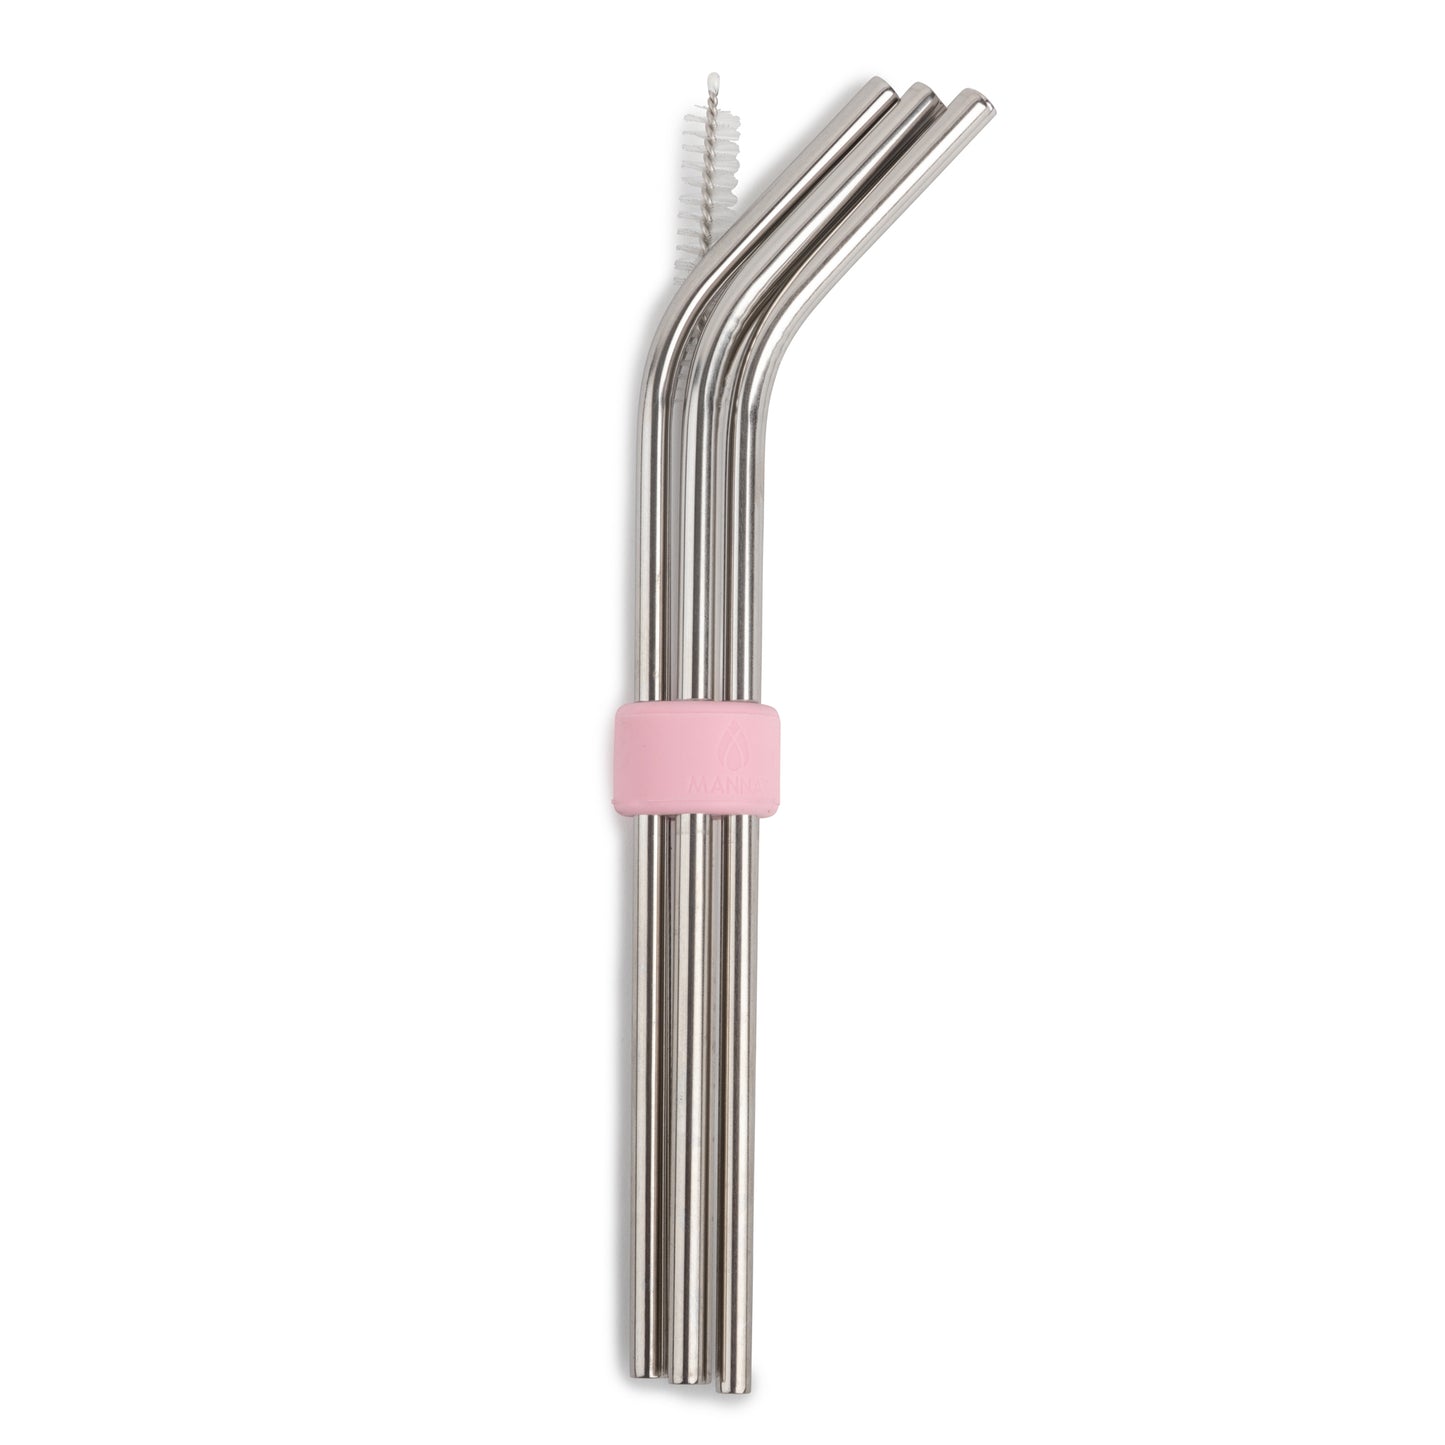 
                  
                    Set of 8 Stainless Steel Reusable Straws&Silicone Straw Holder
                  
                